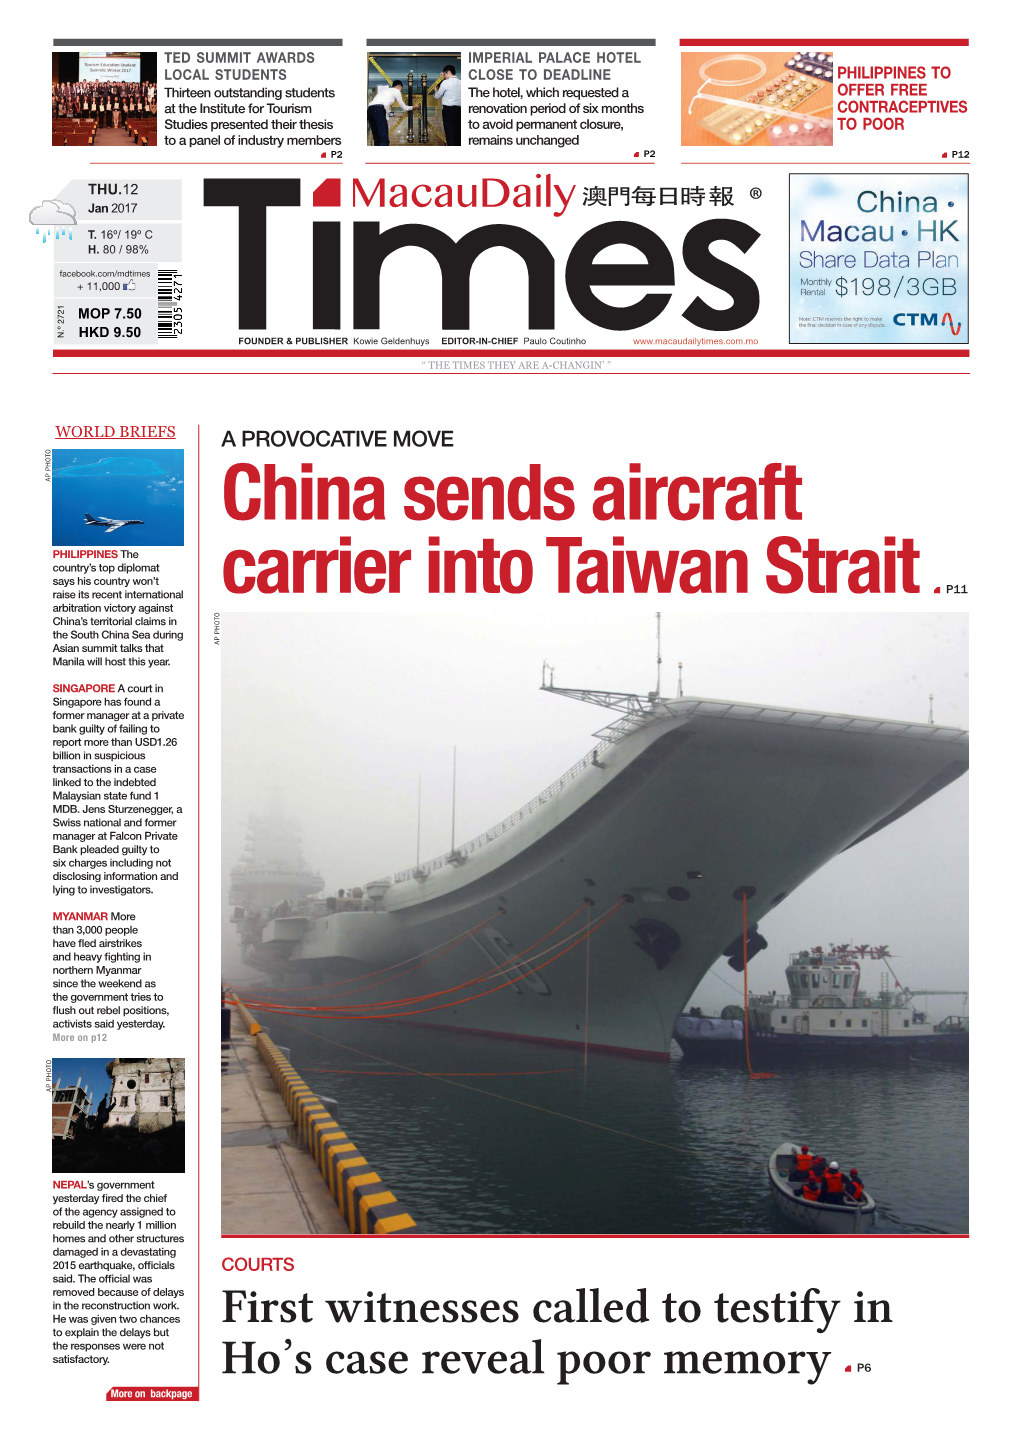 China Sends Aircraft Carrier Into Taiwan Strait